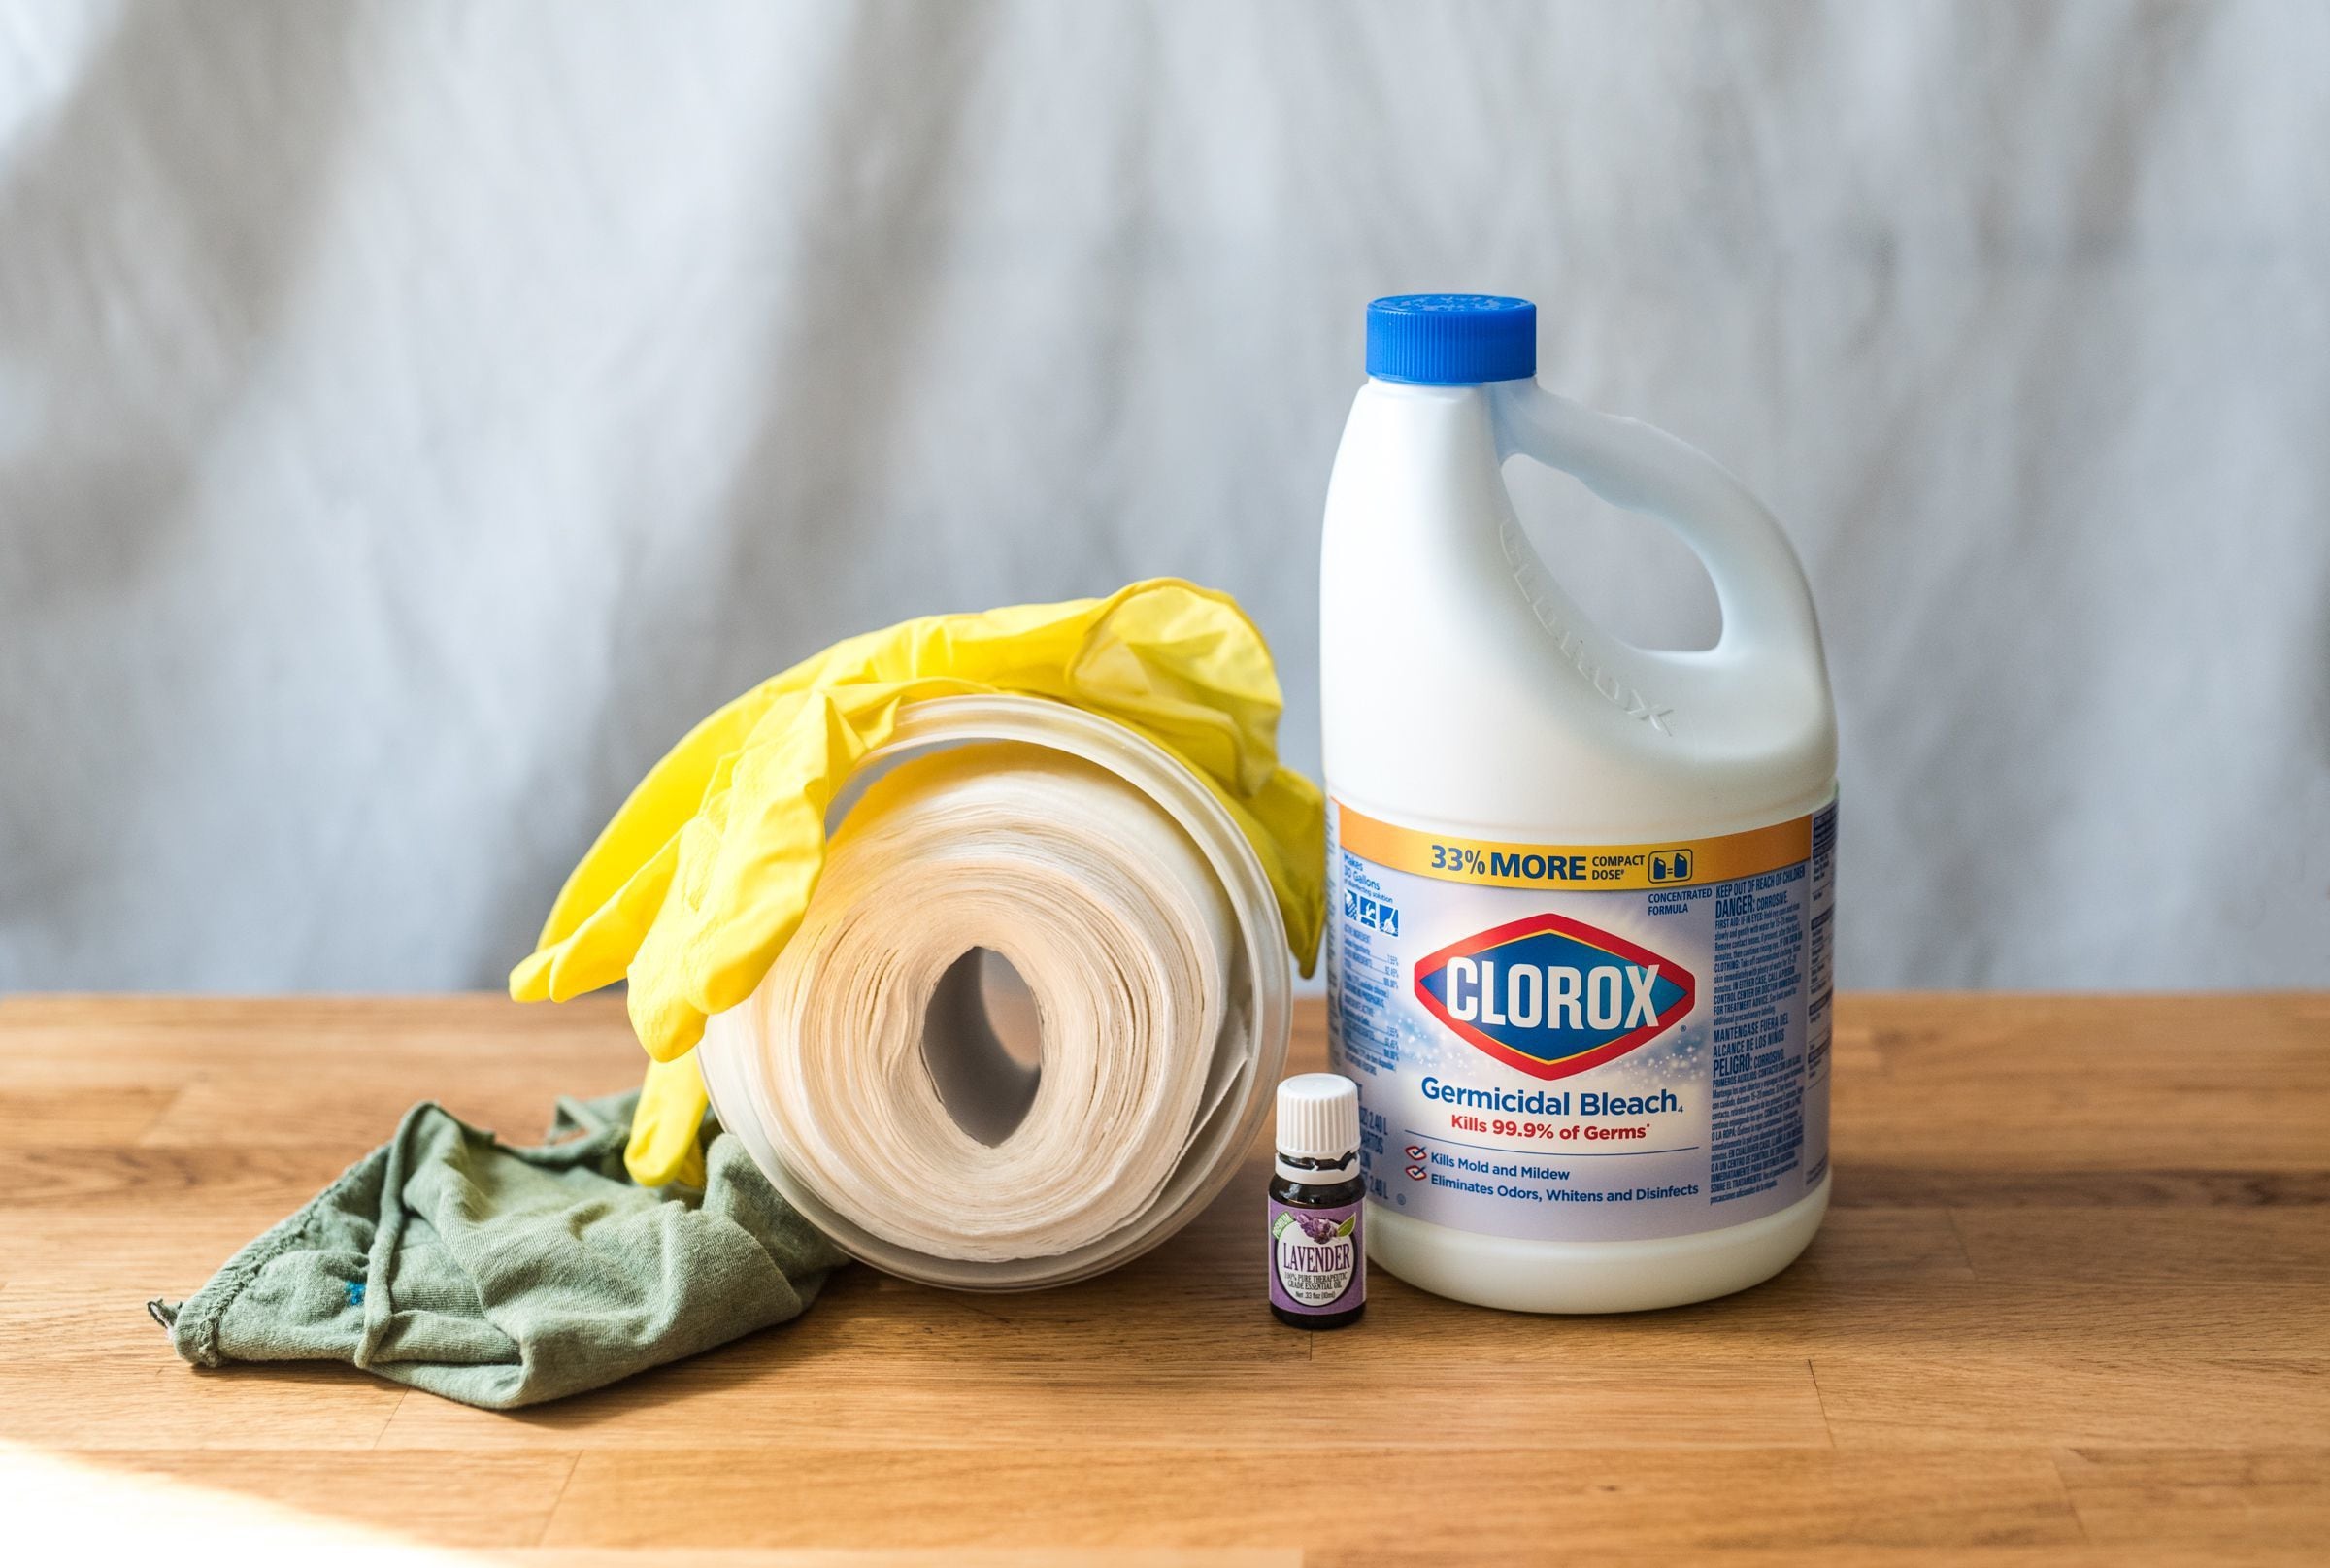 Where you can still buy cleaning wipes during the coronavirus pandemic